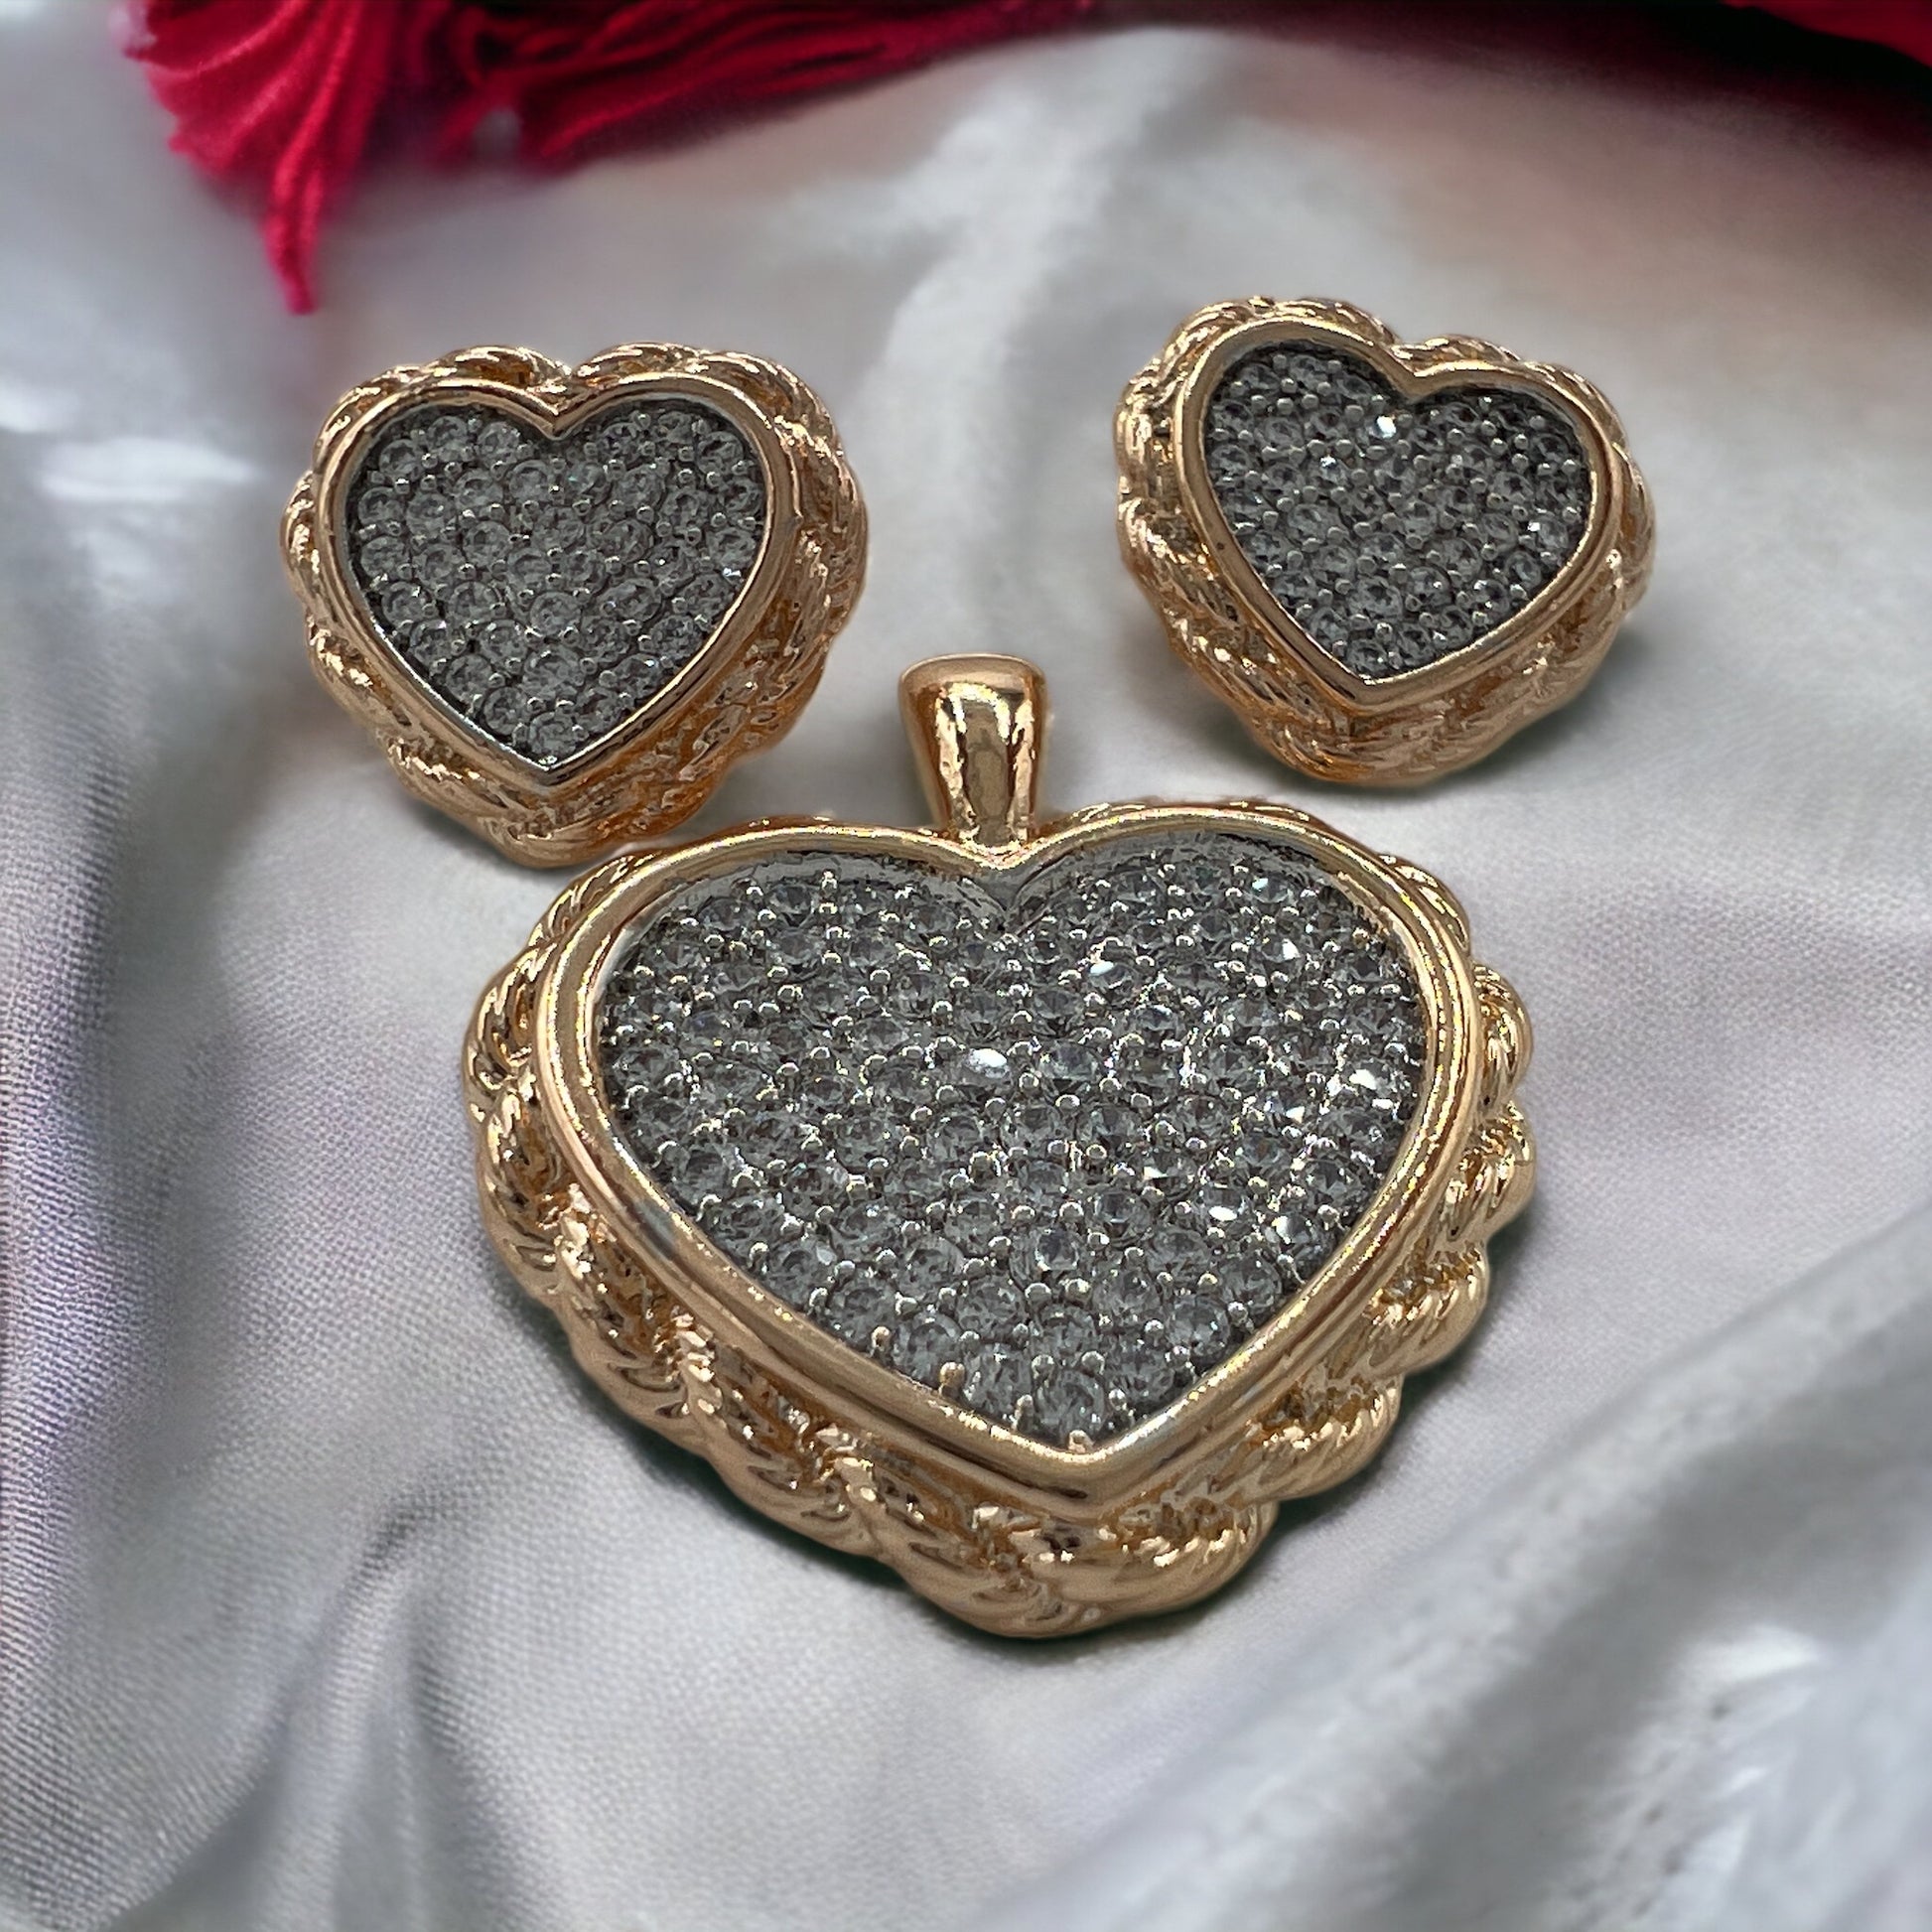 Cute heart shaped studs and necklace diamond look jewelry 